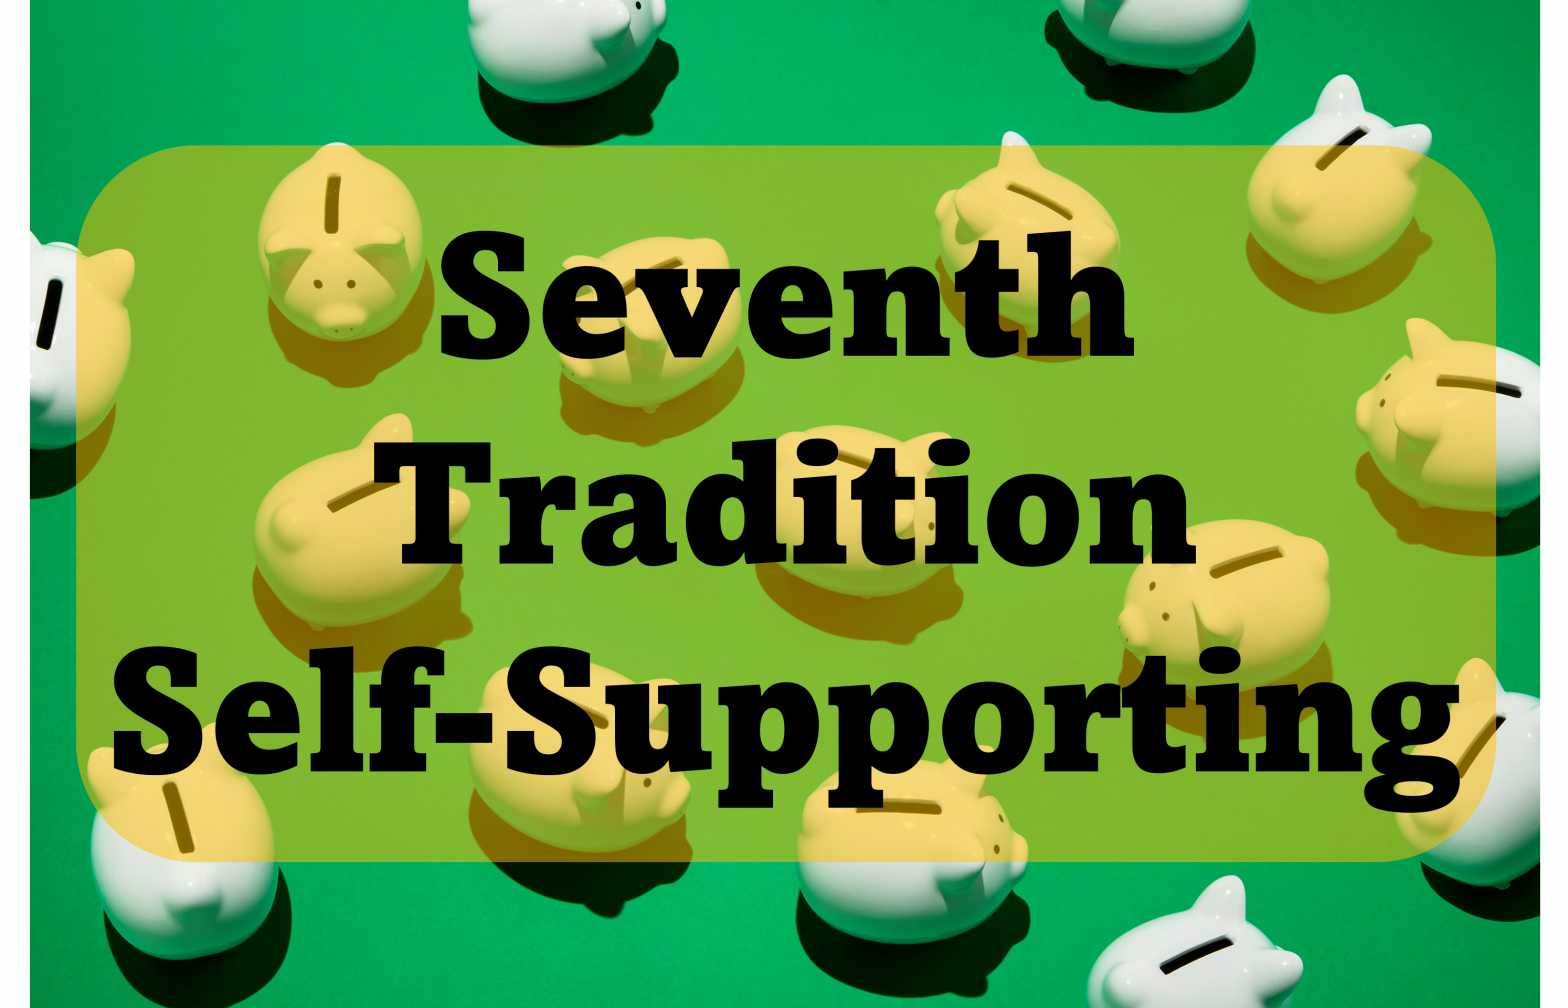 OA 7th Tradition is about self-support